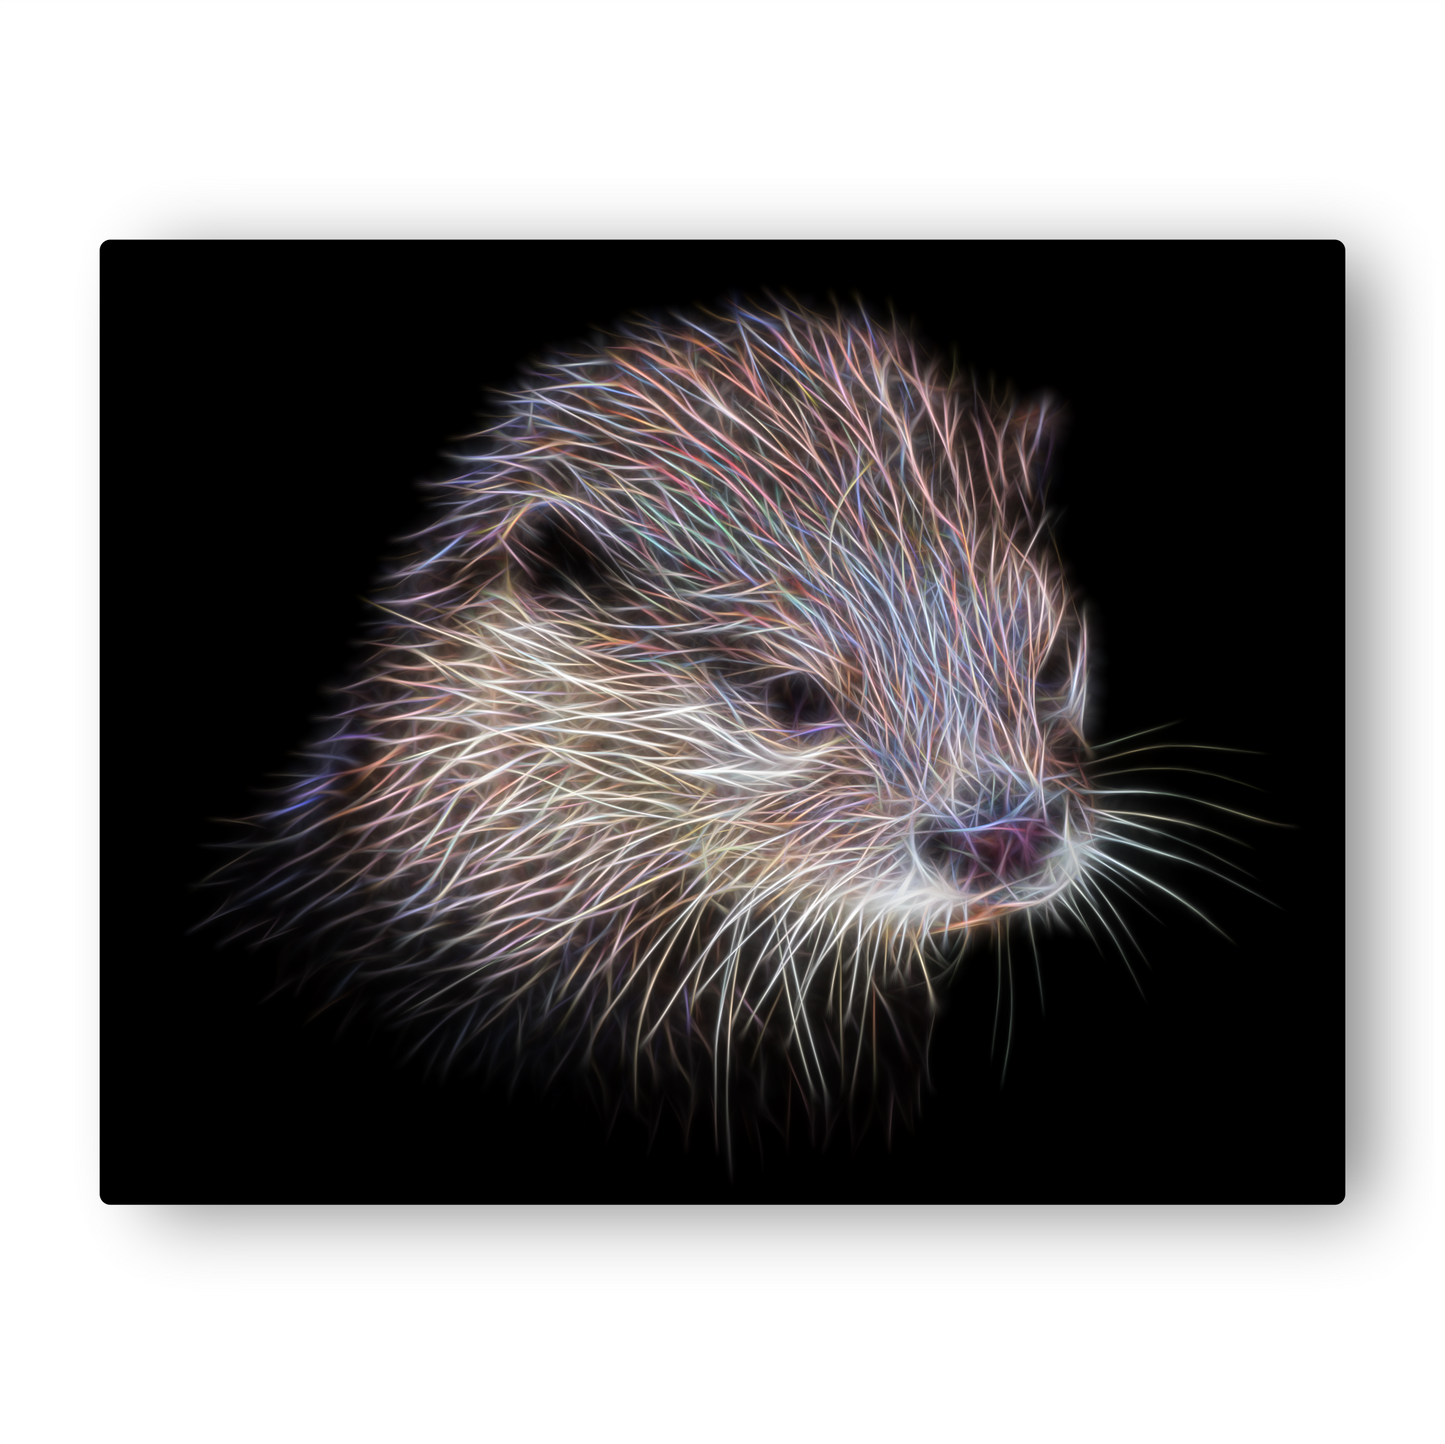 Otter Metal Wall Plaque with Fractal Art Design